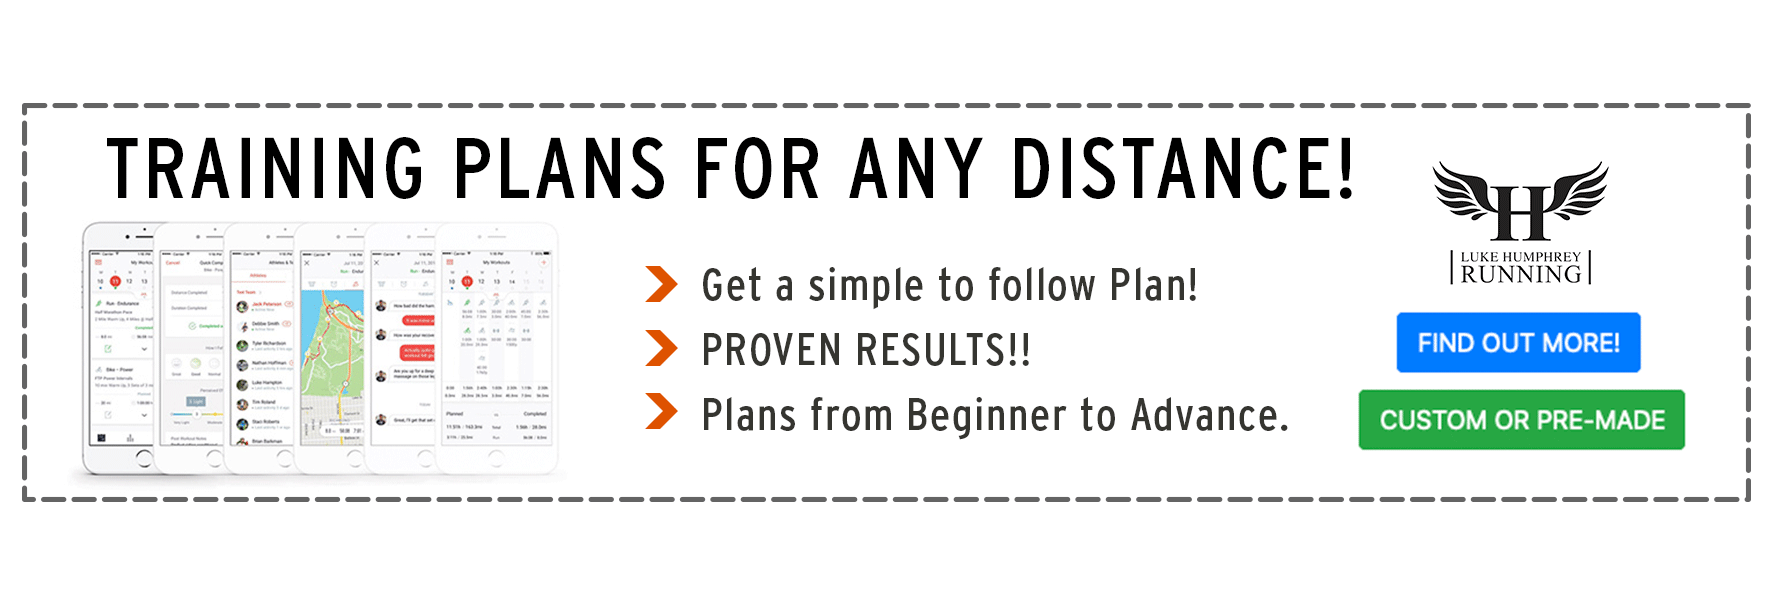 Custom or Pre-Made Training Plans for any distance!